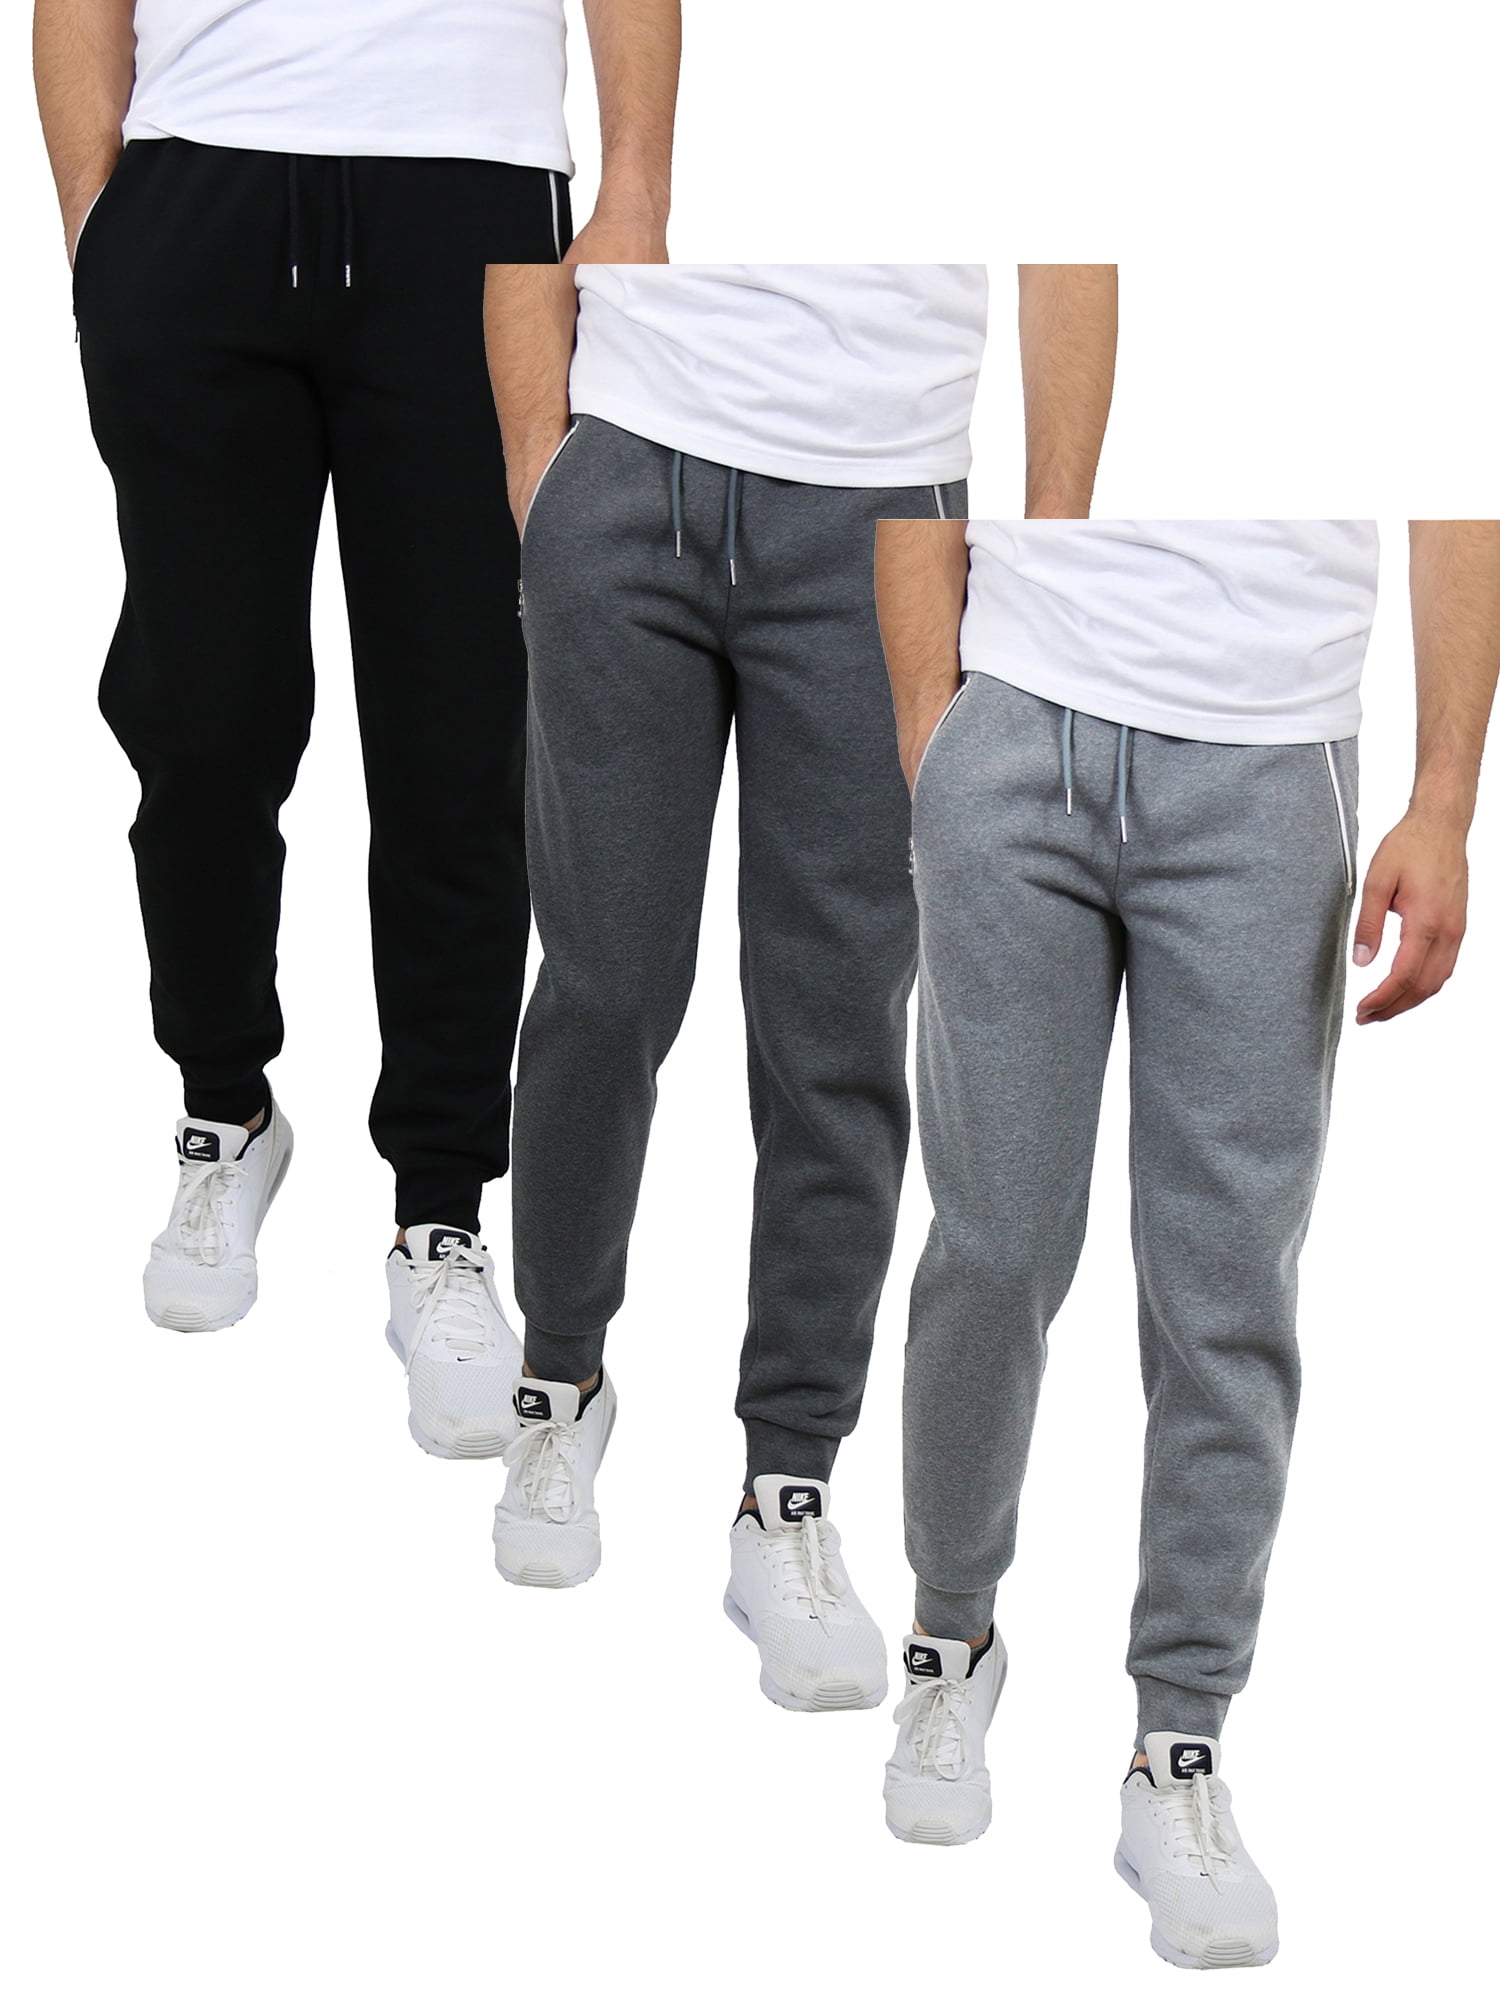 Galaxy by Harvic 3-Pack Mens Slim Fit Fleece Jogger Sweatpants (S-2XL) 